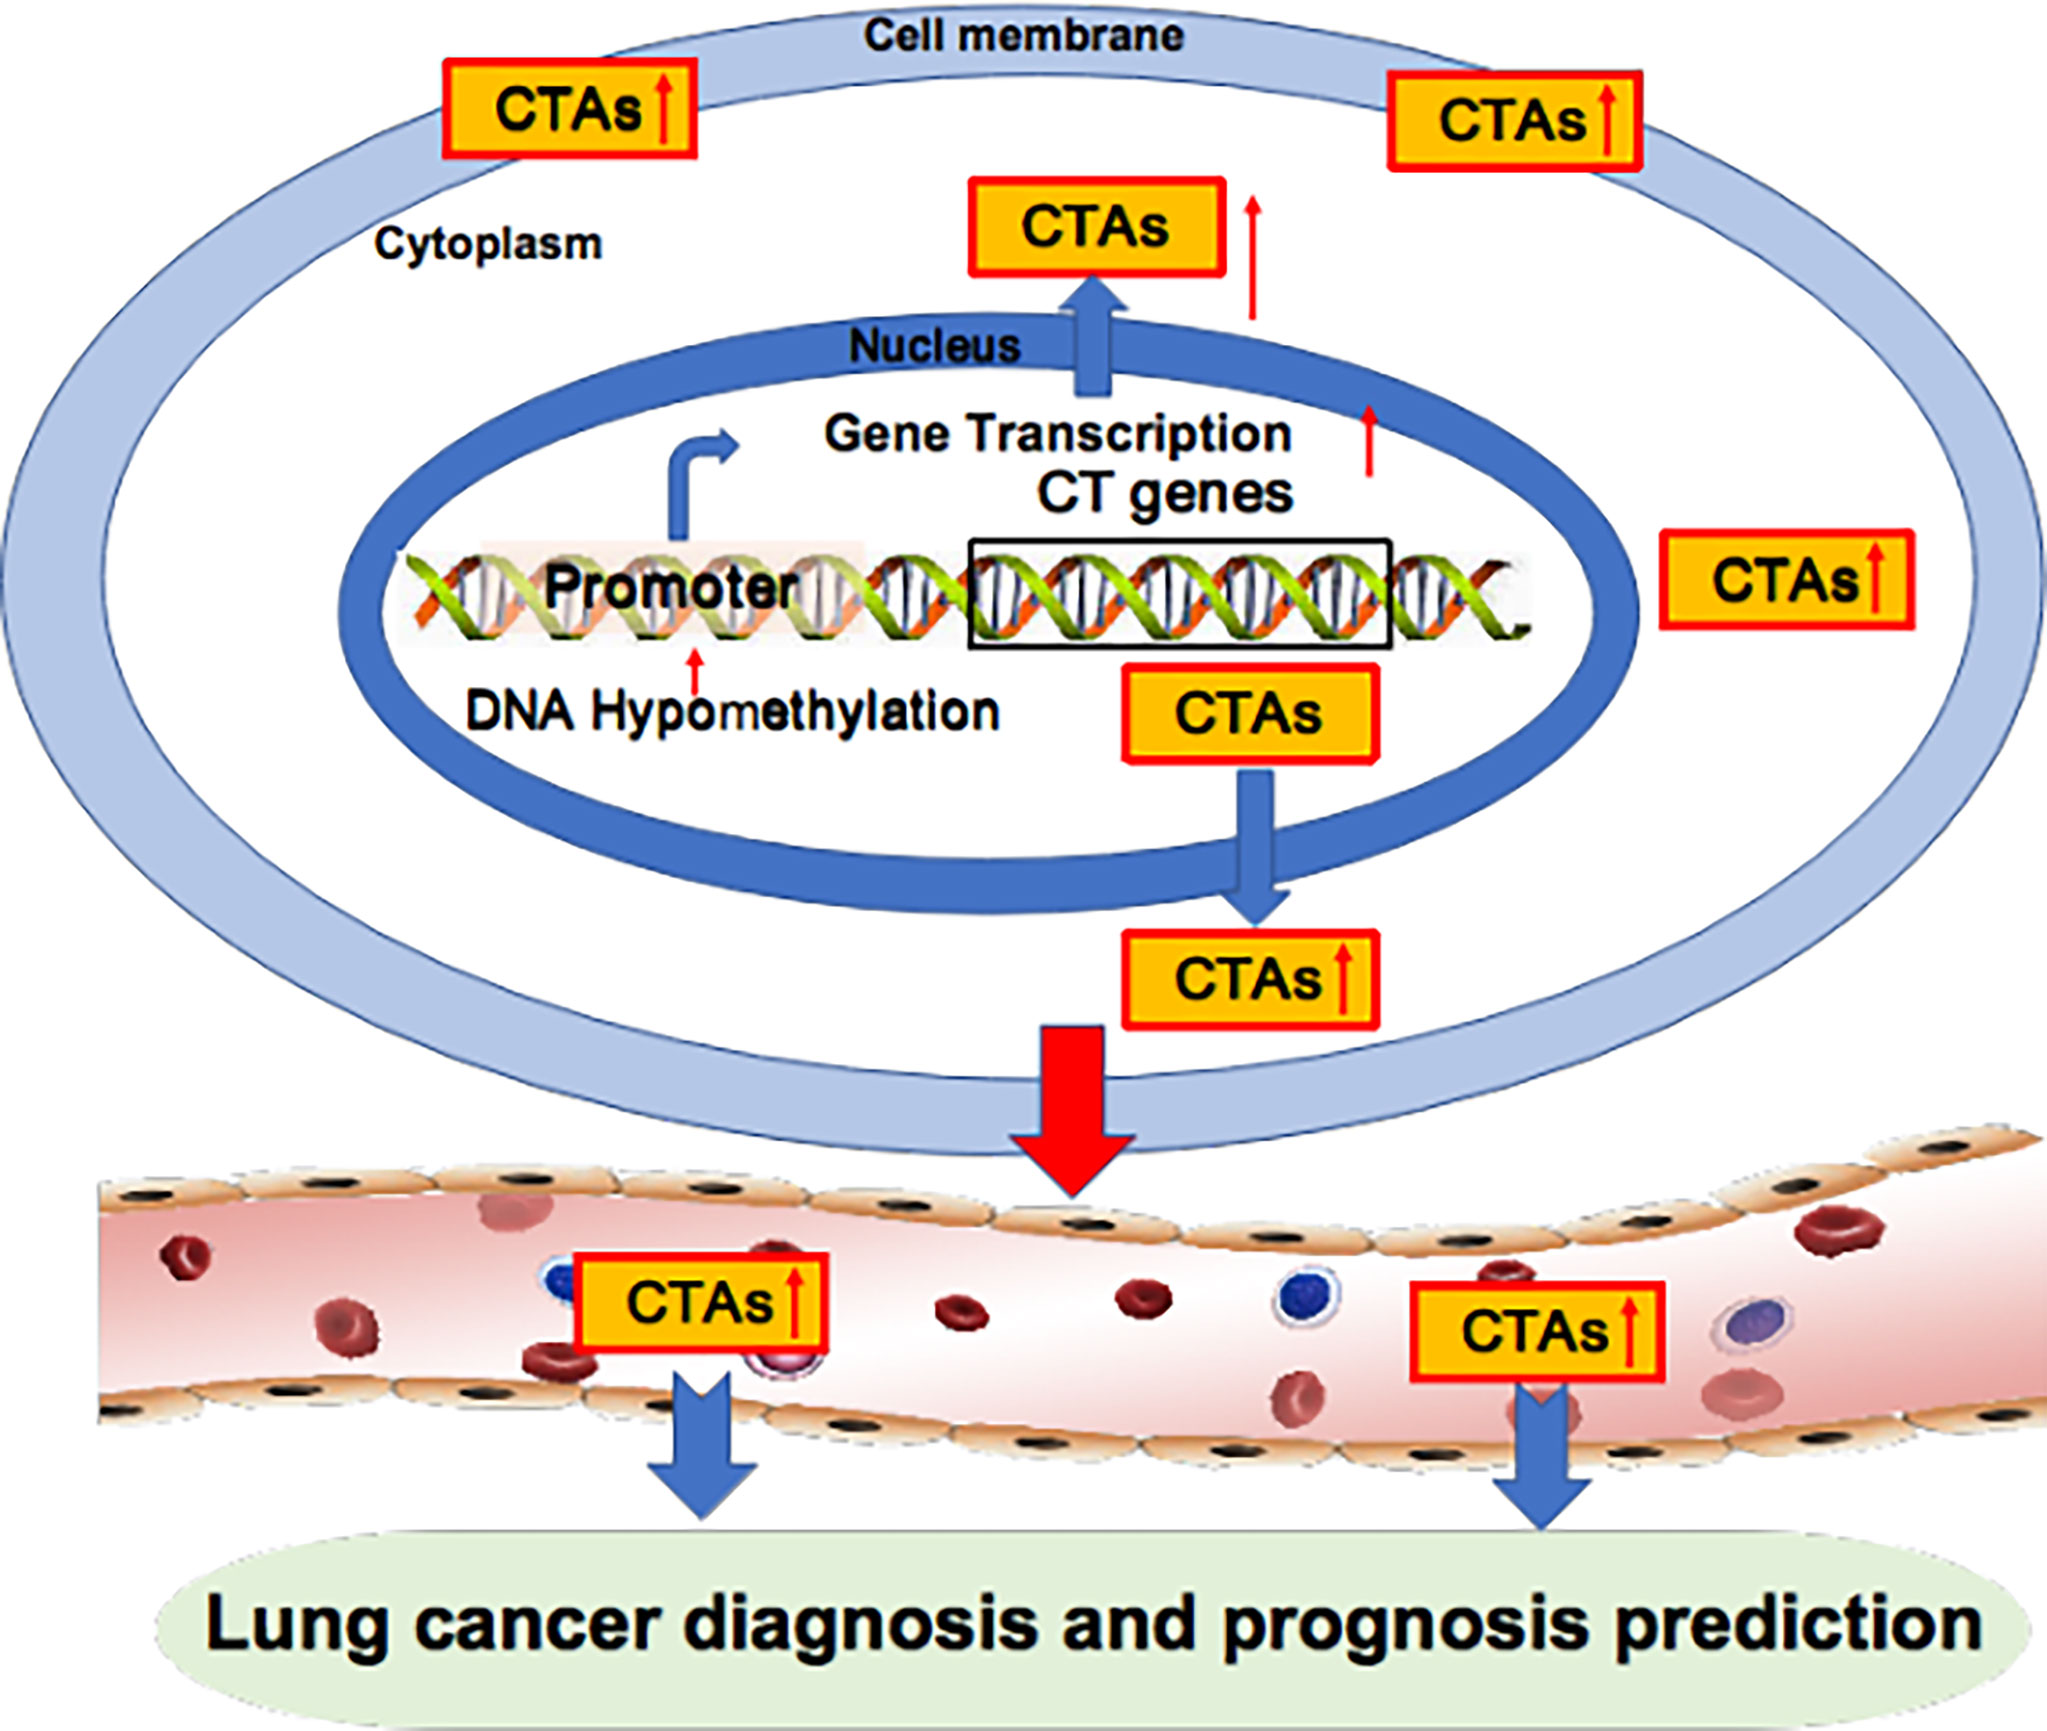 The CLIP1–LTK fusion is an oncogenic driver in non‐small‐cell lung cancer